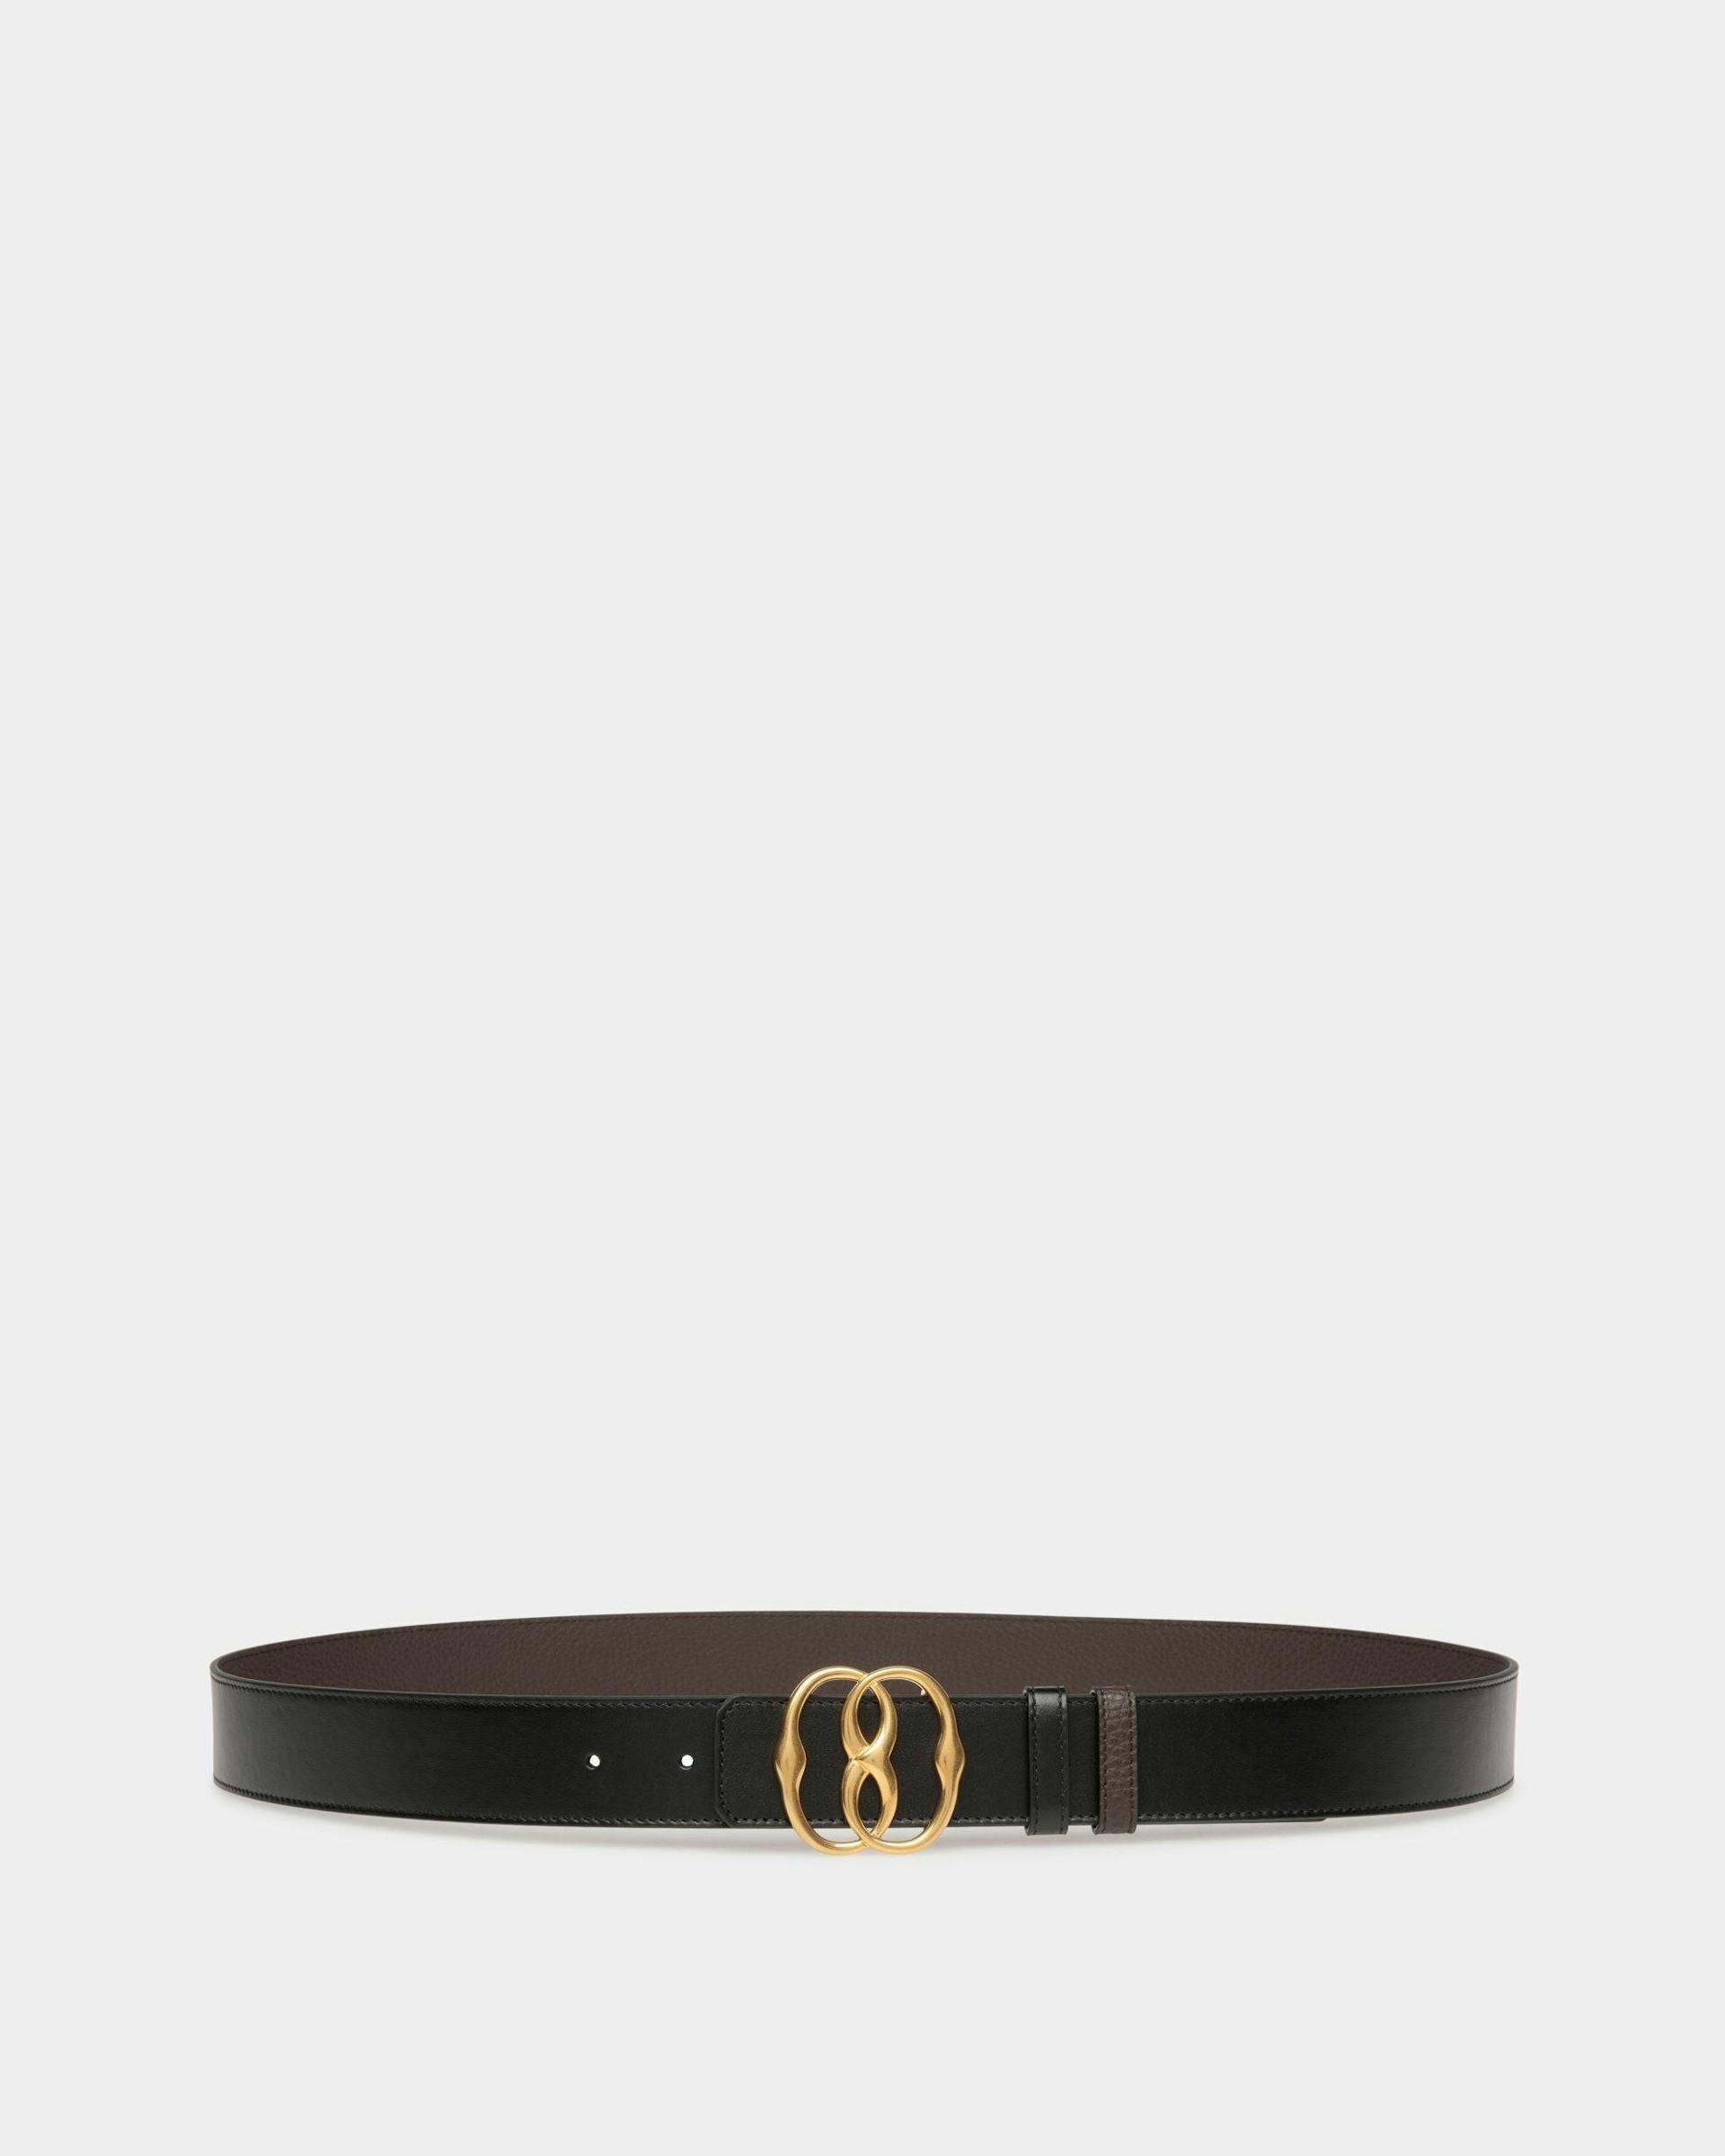 Bally Iconic 35mm Belt In Brown And Black Leather - Men's - Bally - 01